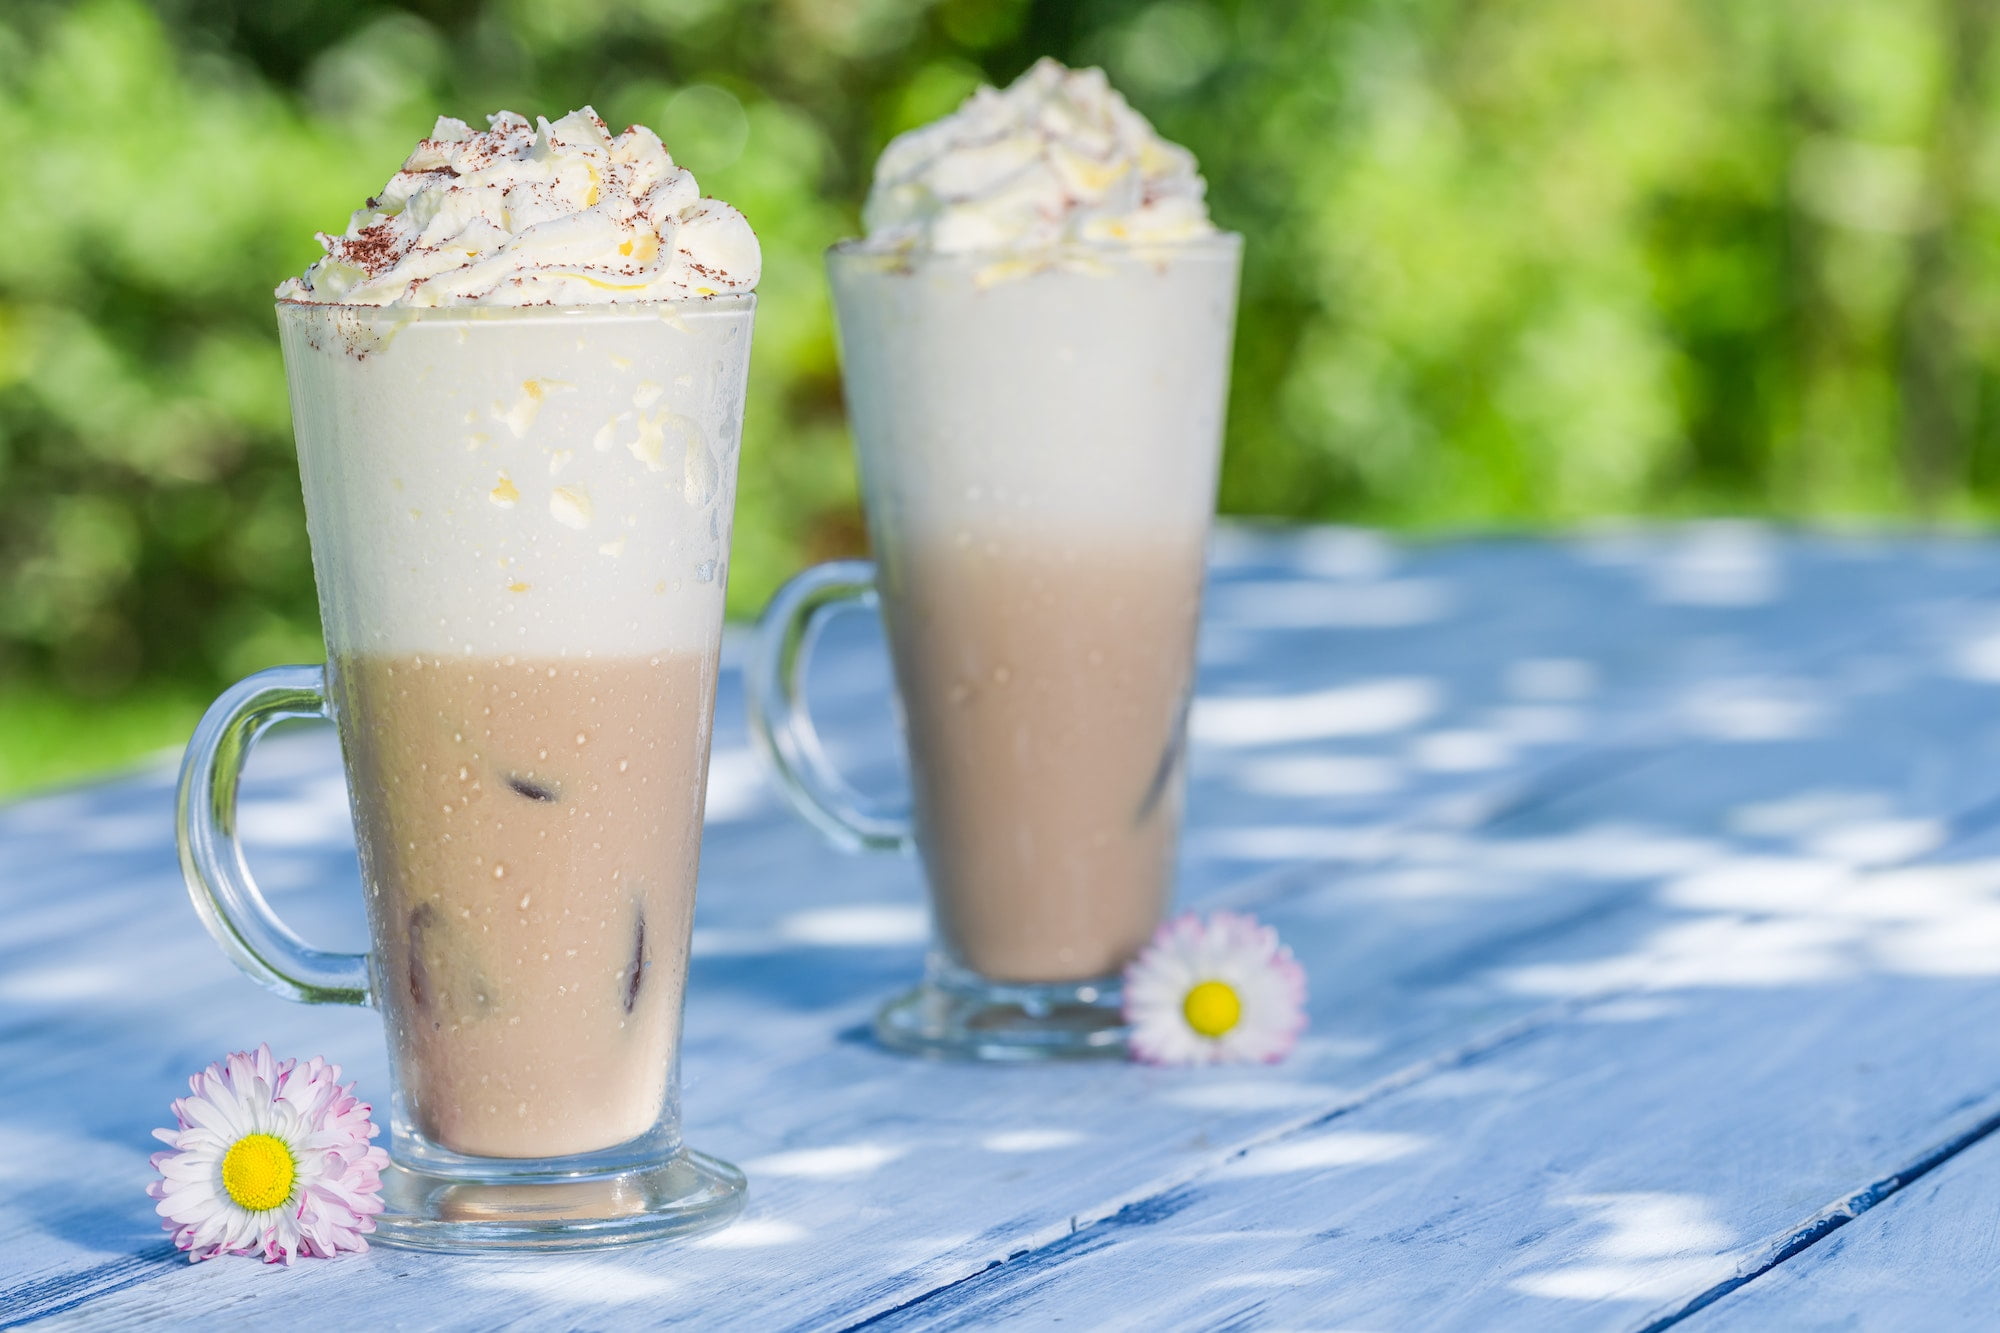 Cold coffee in summer in sunny garden